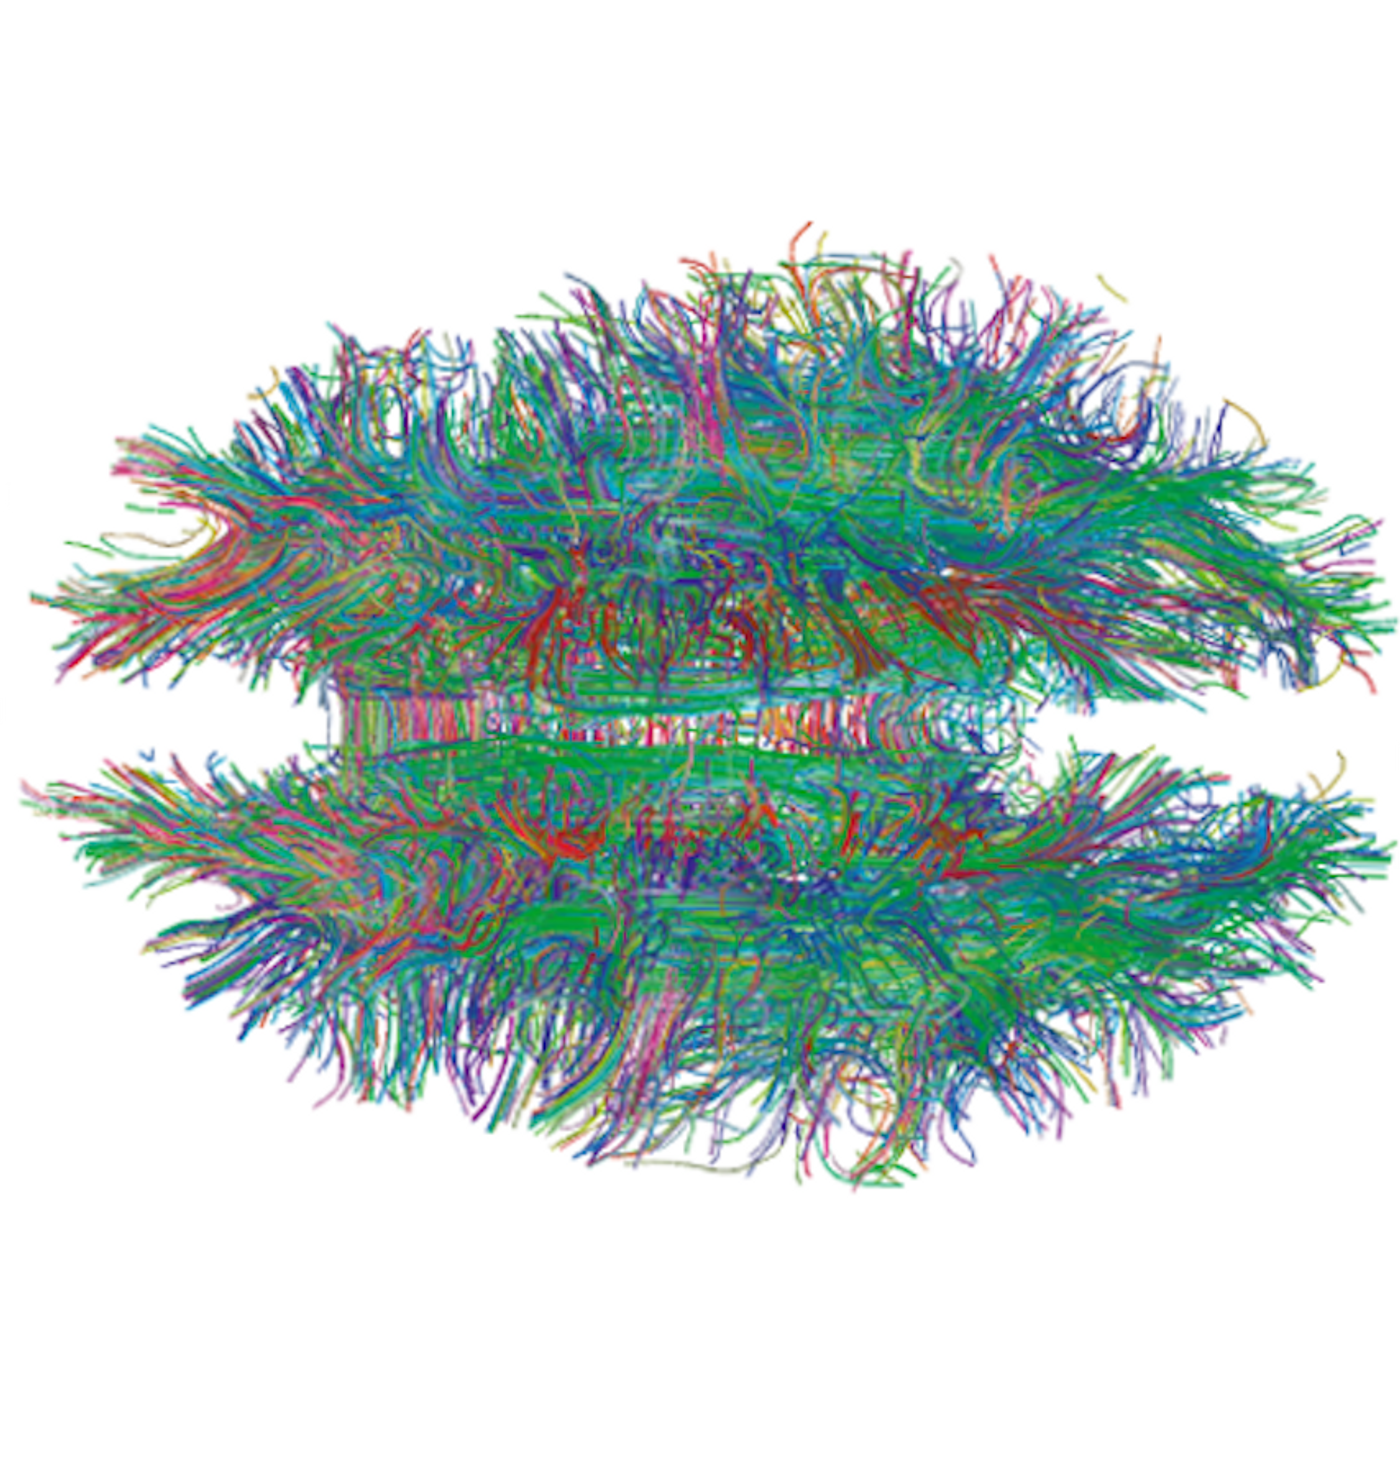 In this figure from Gigandet X et al. (2008) PLoS ONE, white matter connections in the brain are visualized by diffusion MRI Tractography